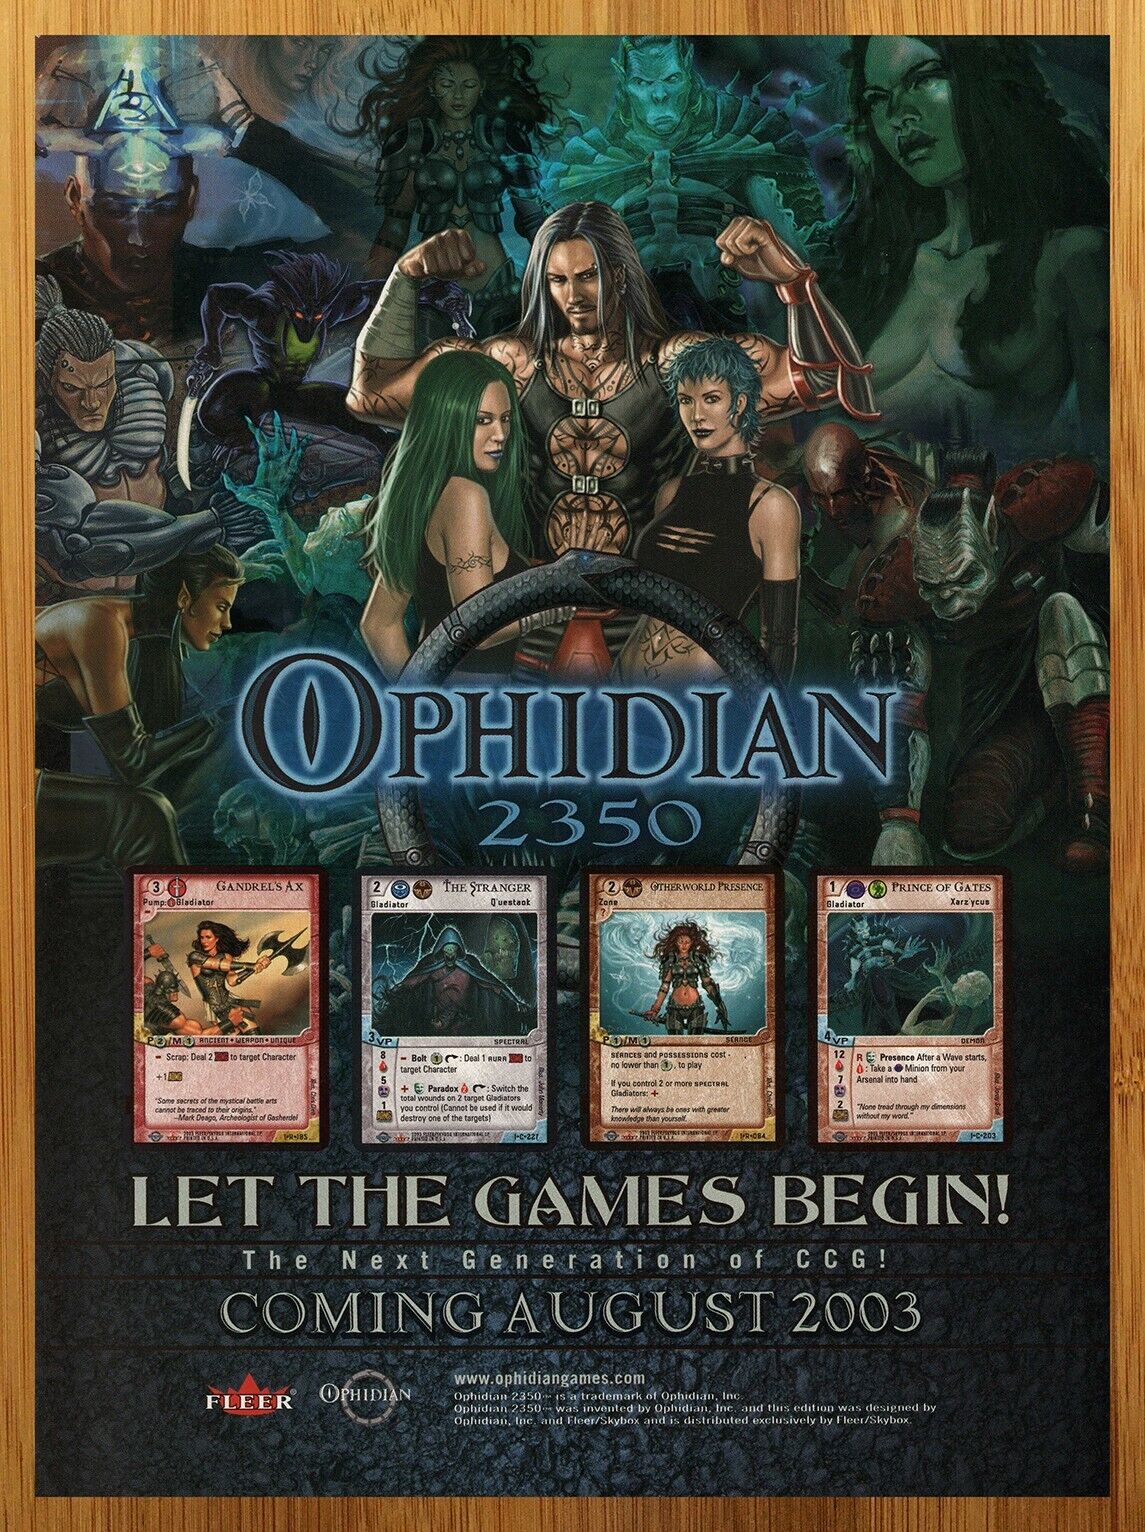 2003 Ophidian 2350 CCG Print Ad/Poster Fantasy Gladiator TCG Card Game Promo Art